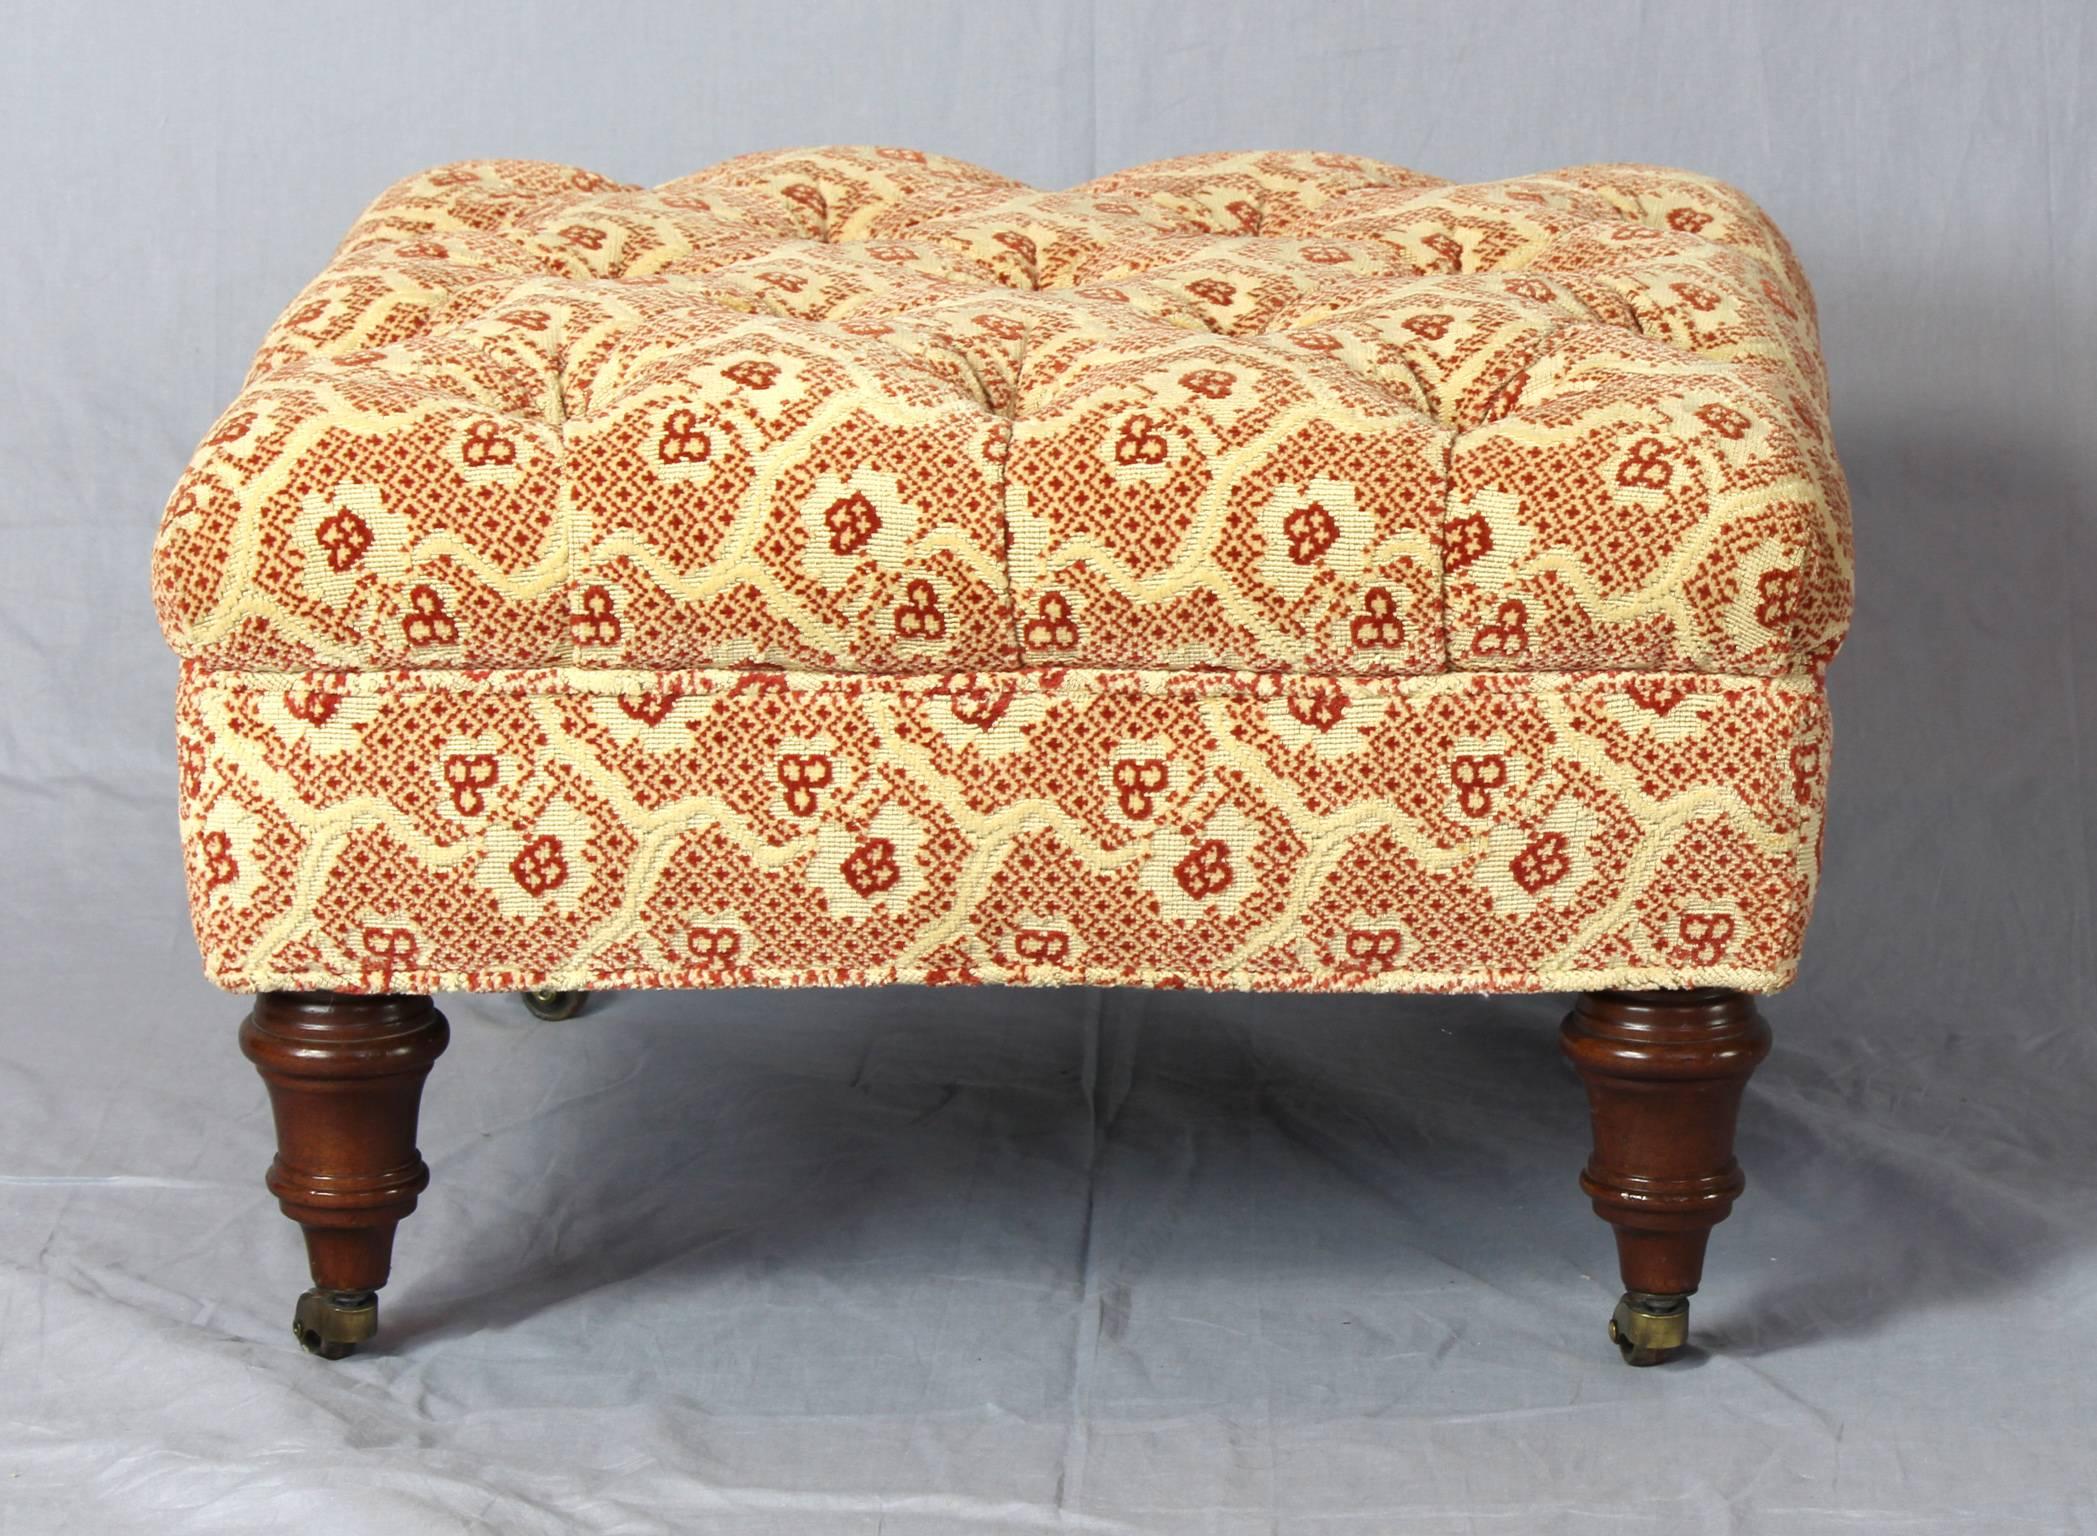 A diminutive buttoned upholstered footstool or ottoman on turned wooden legs terminating in brass casters.